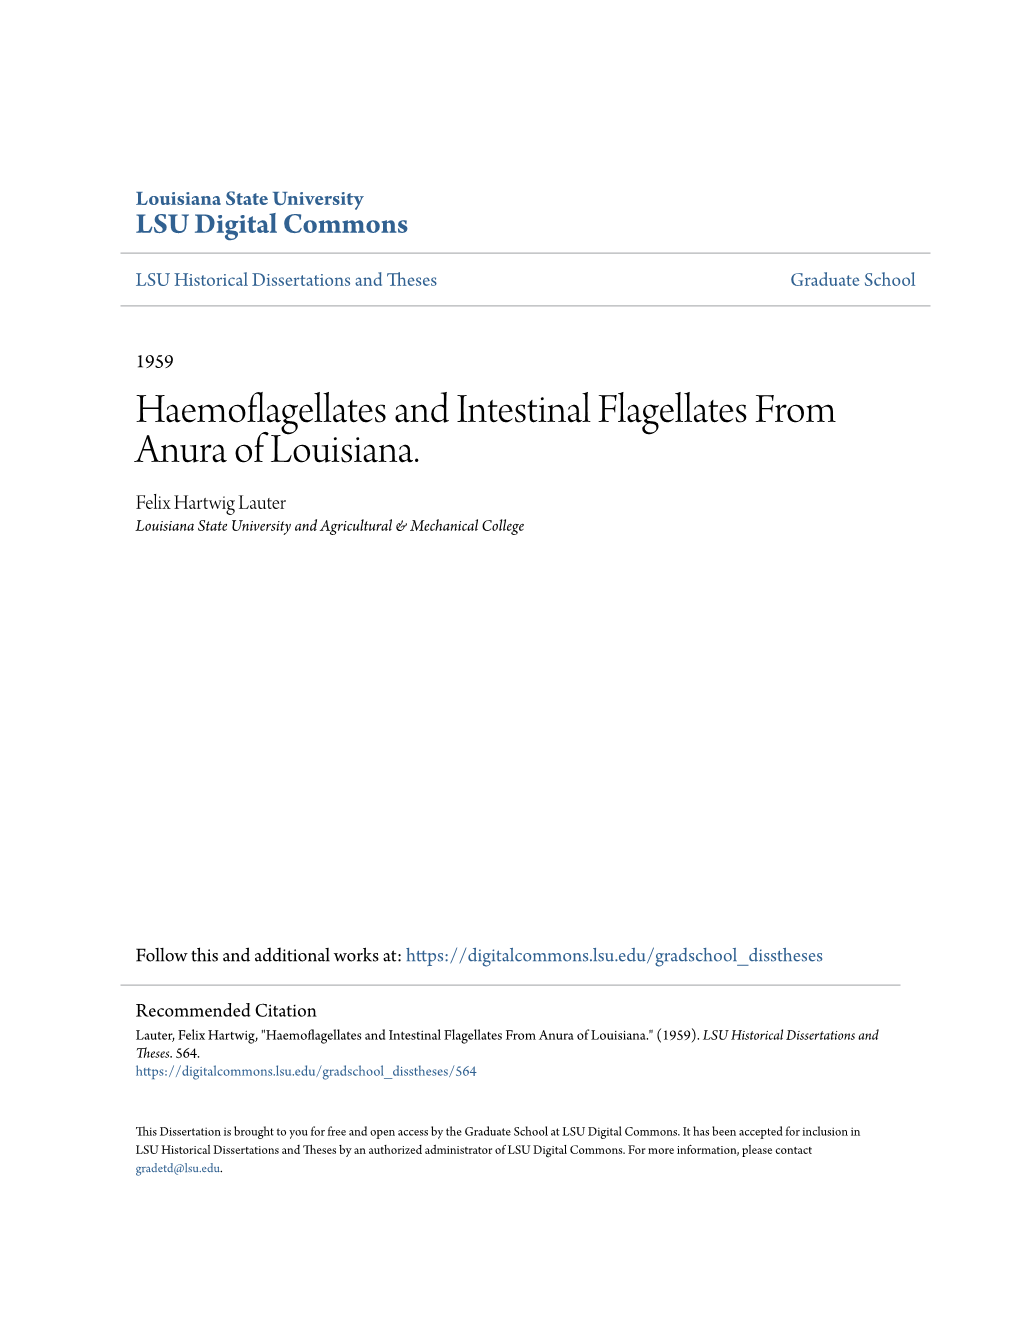 Haemoflagellates and Intestinal Flagellates from Anura of Louisiana. Felix Hartwig Lauter Louisiana State University and Agricultural & Mechanical College